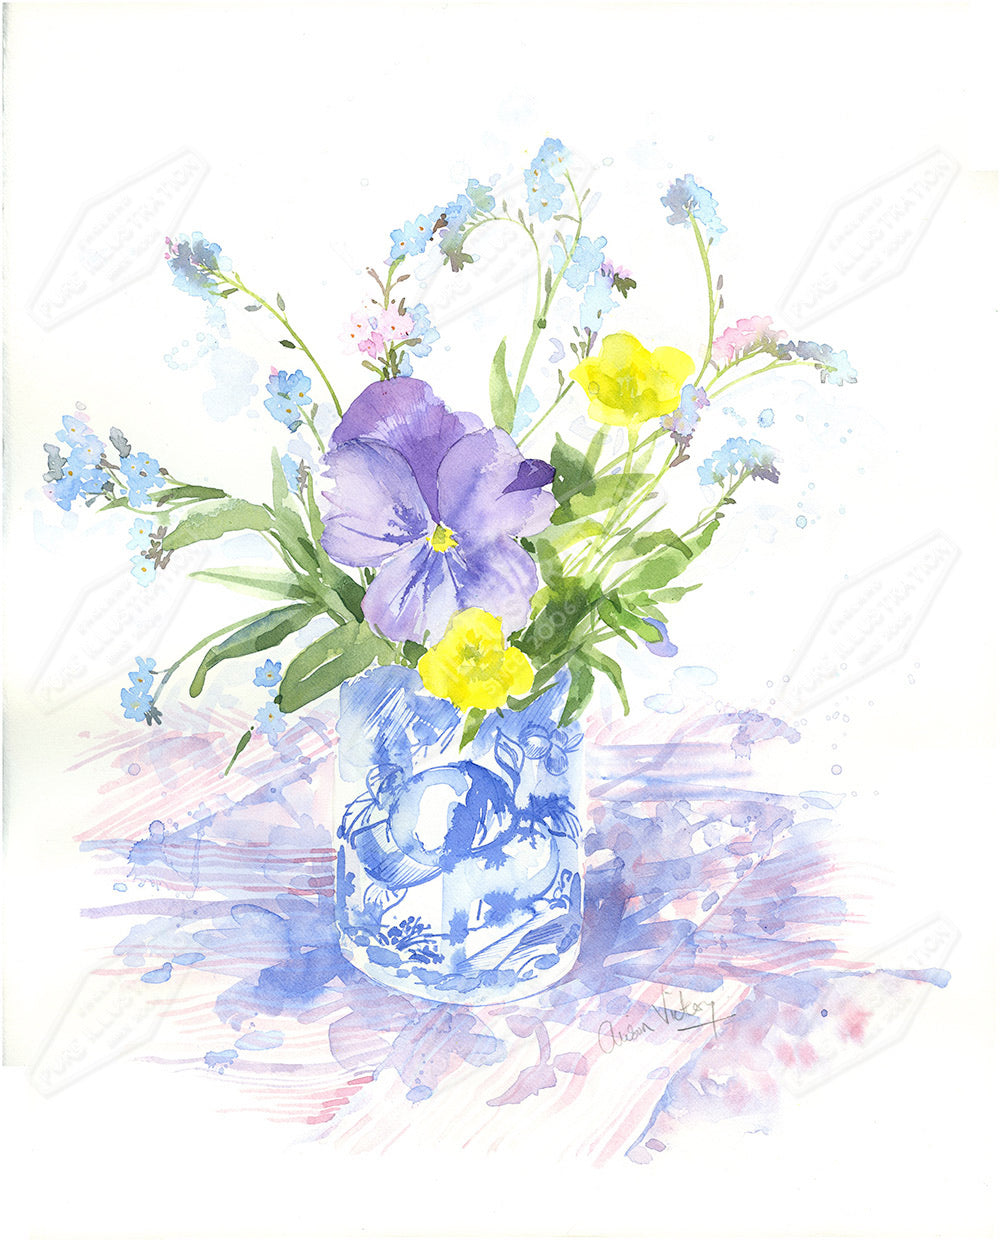 00033489AVI- Alison Vickery is represented by Pure Art Licensing Agency - Everyday Greeting Card Design